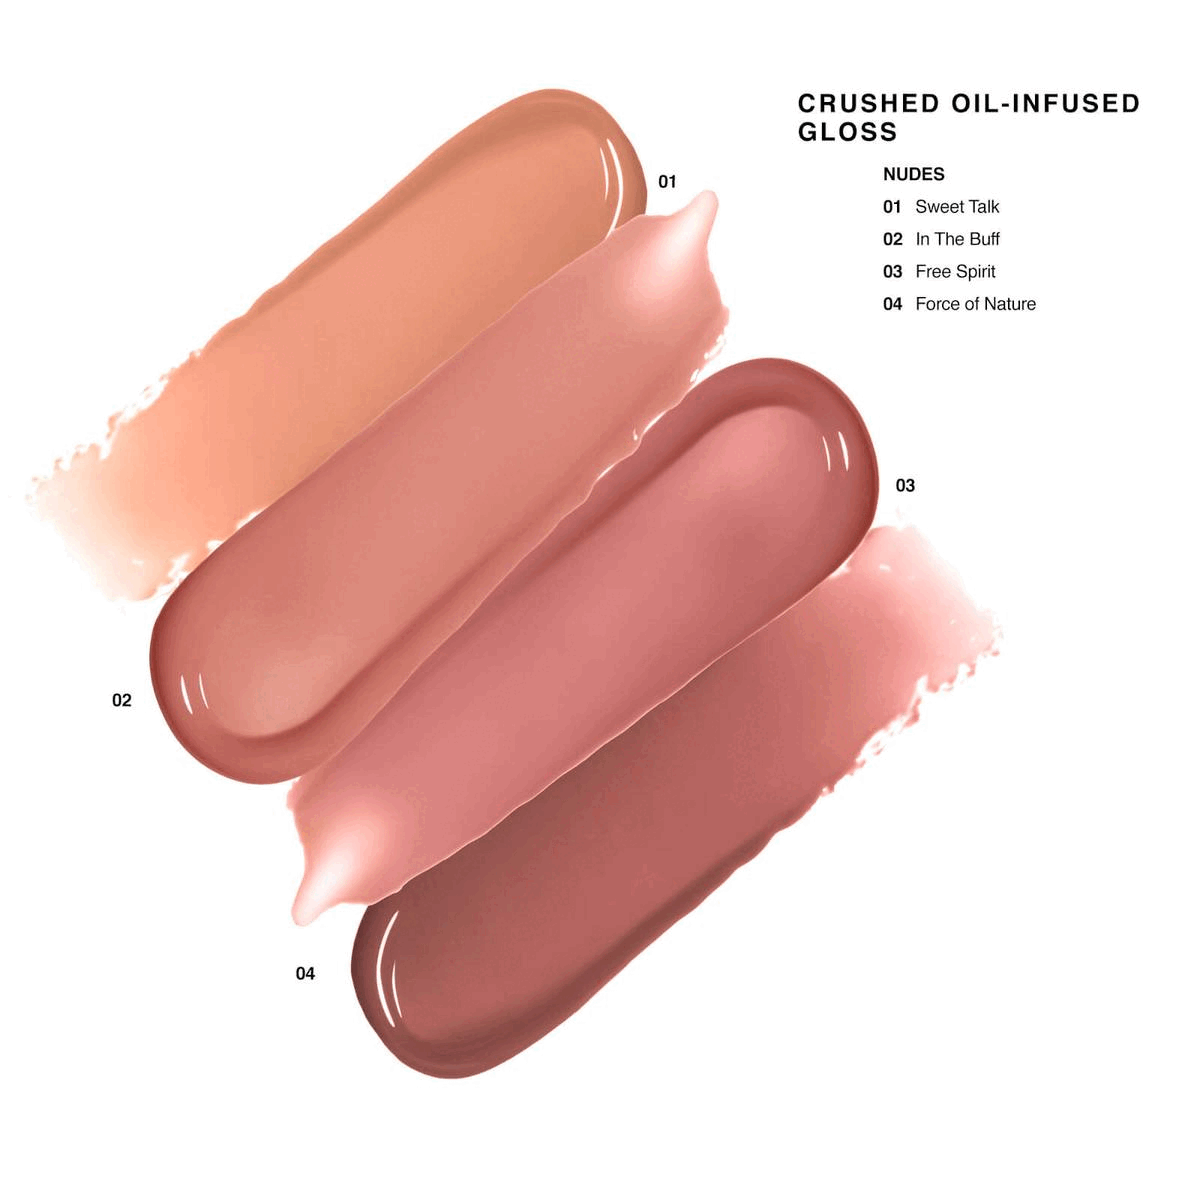 Crushed Oil-Infused Gloss shades